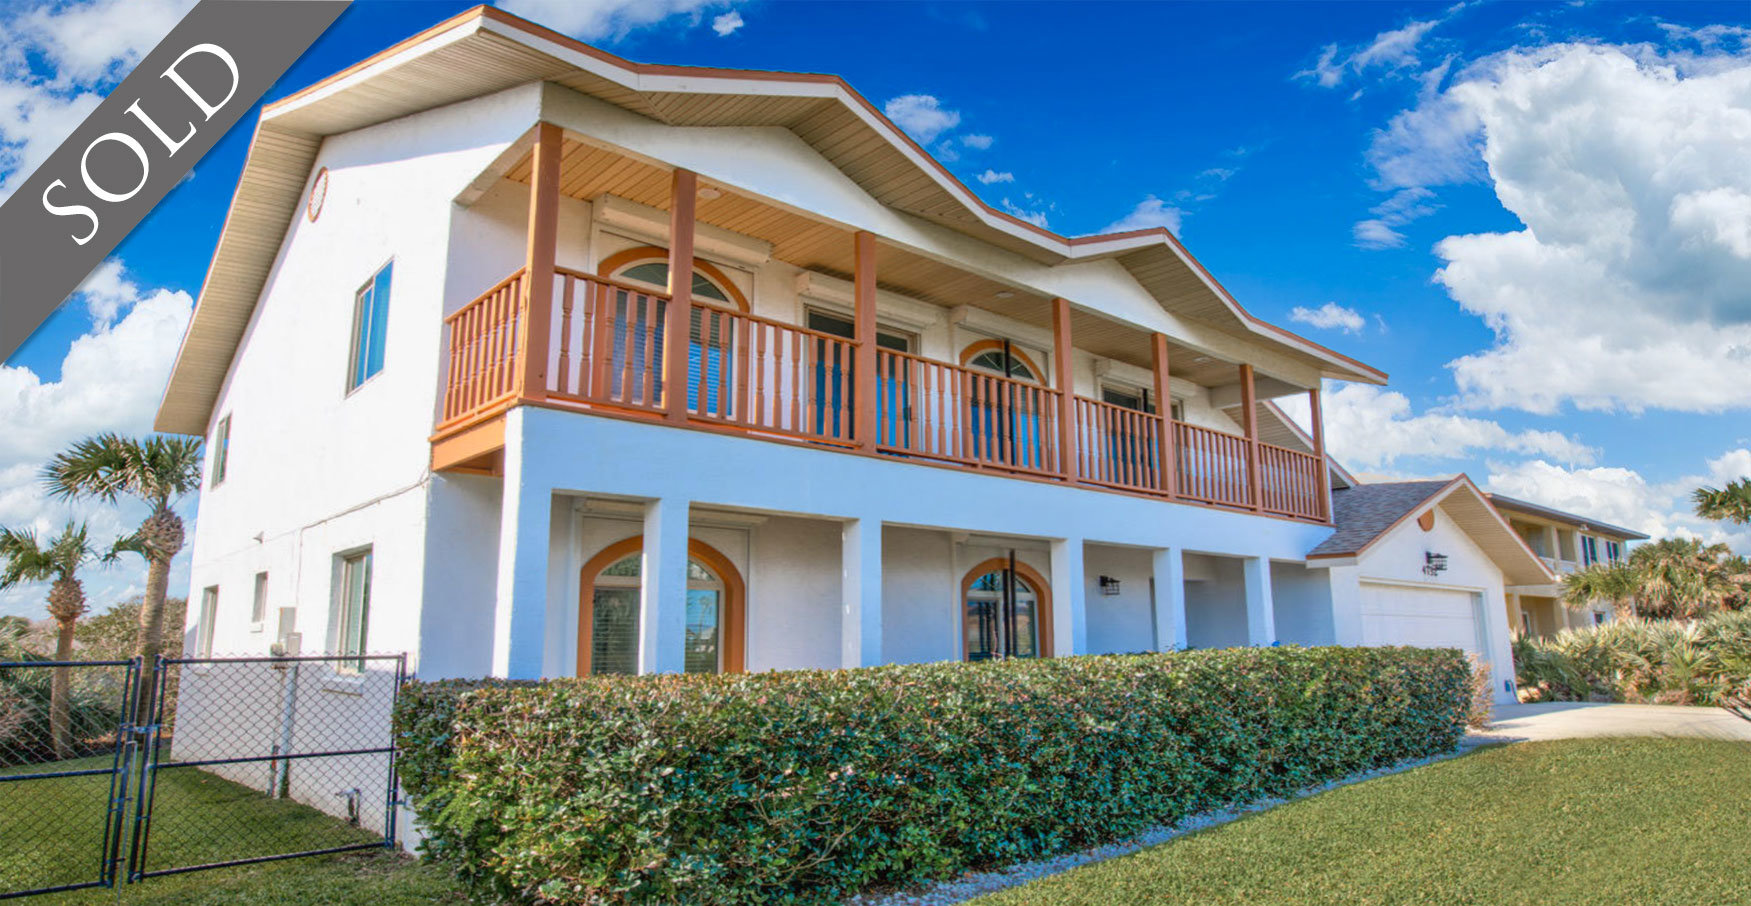 Ponce Inlet Real Estate For Sale. 4732 S Atlantic Ave Beachside ocean view homes for sale